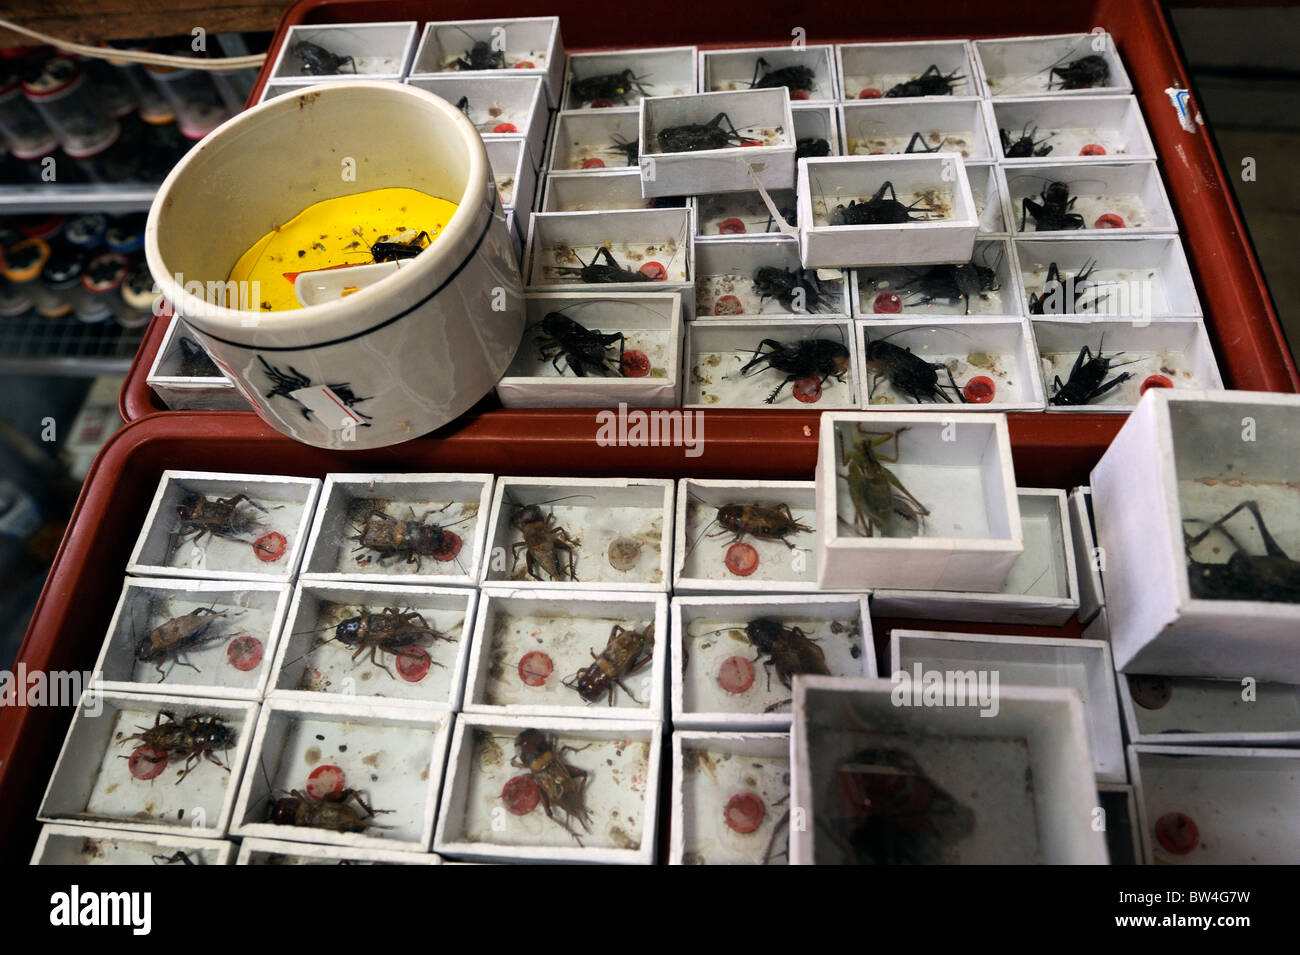 Crickets and other insects for sale in a pet market in Qingdao, Shandong province, China. Stock Photo